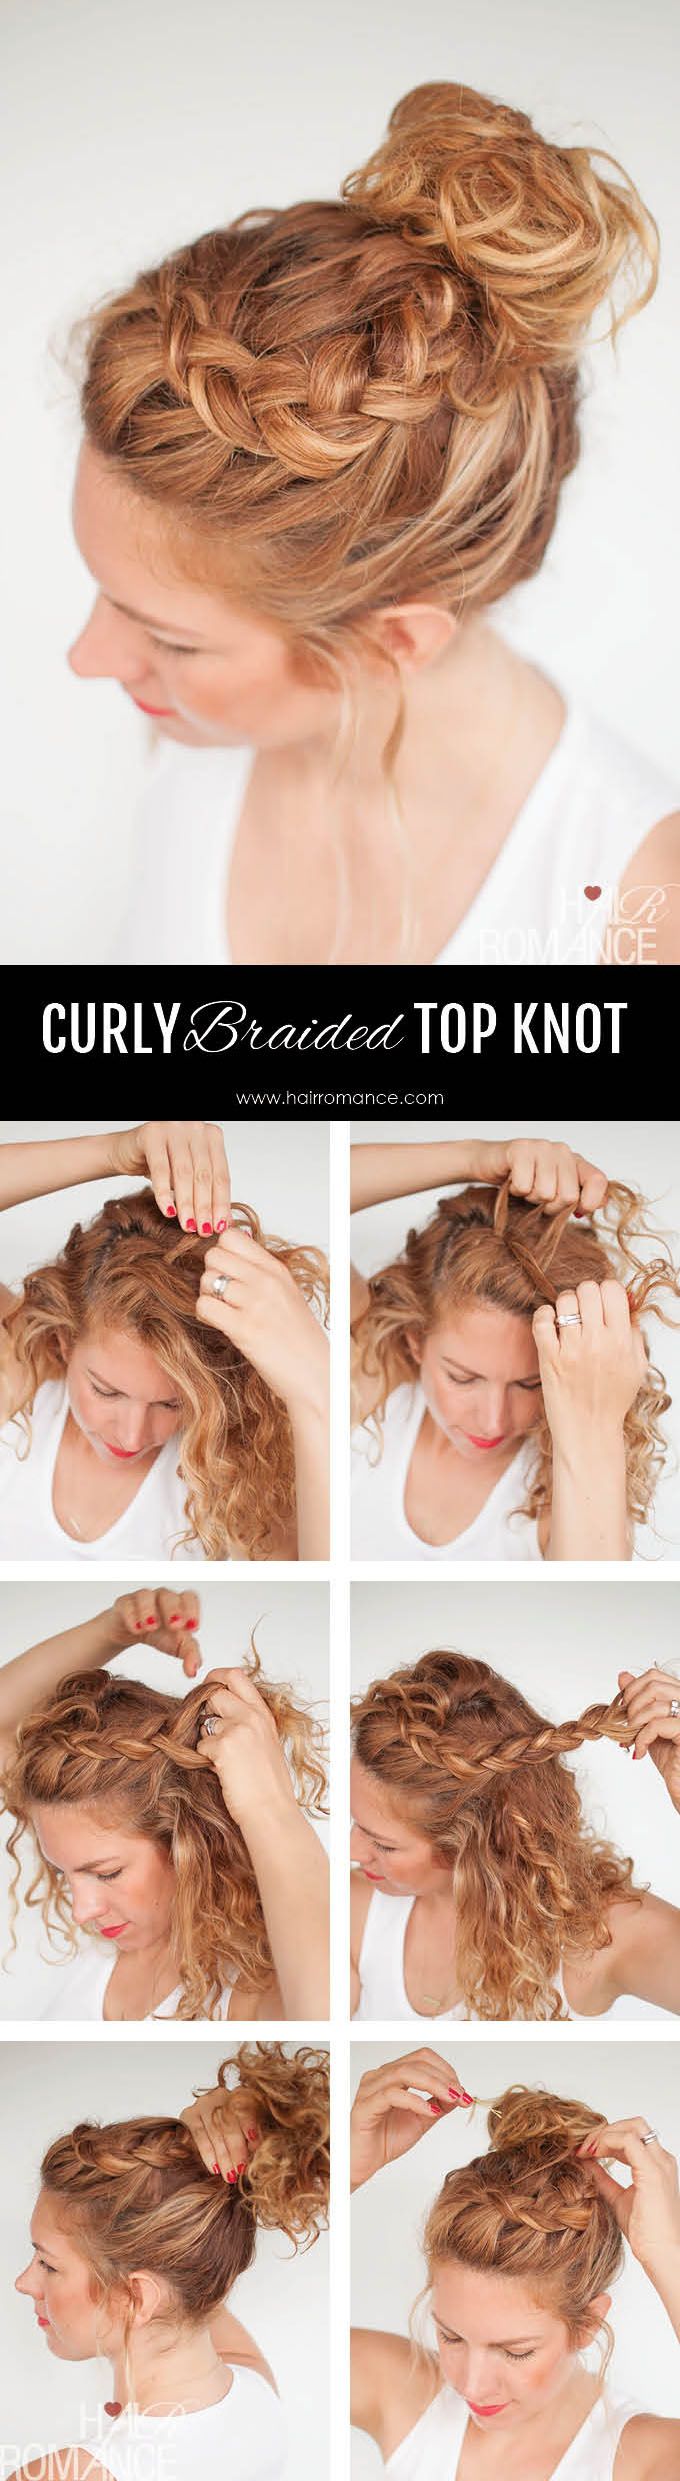 Everyday curly hairstyles – Curly Braided Top Knot Hairstyle Tutorial